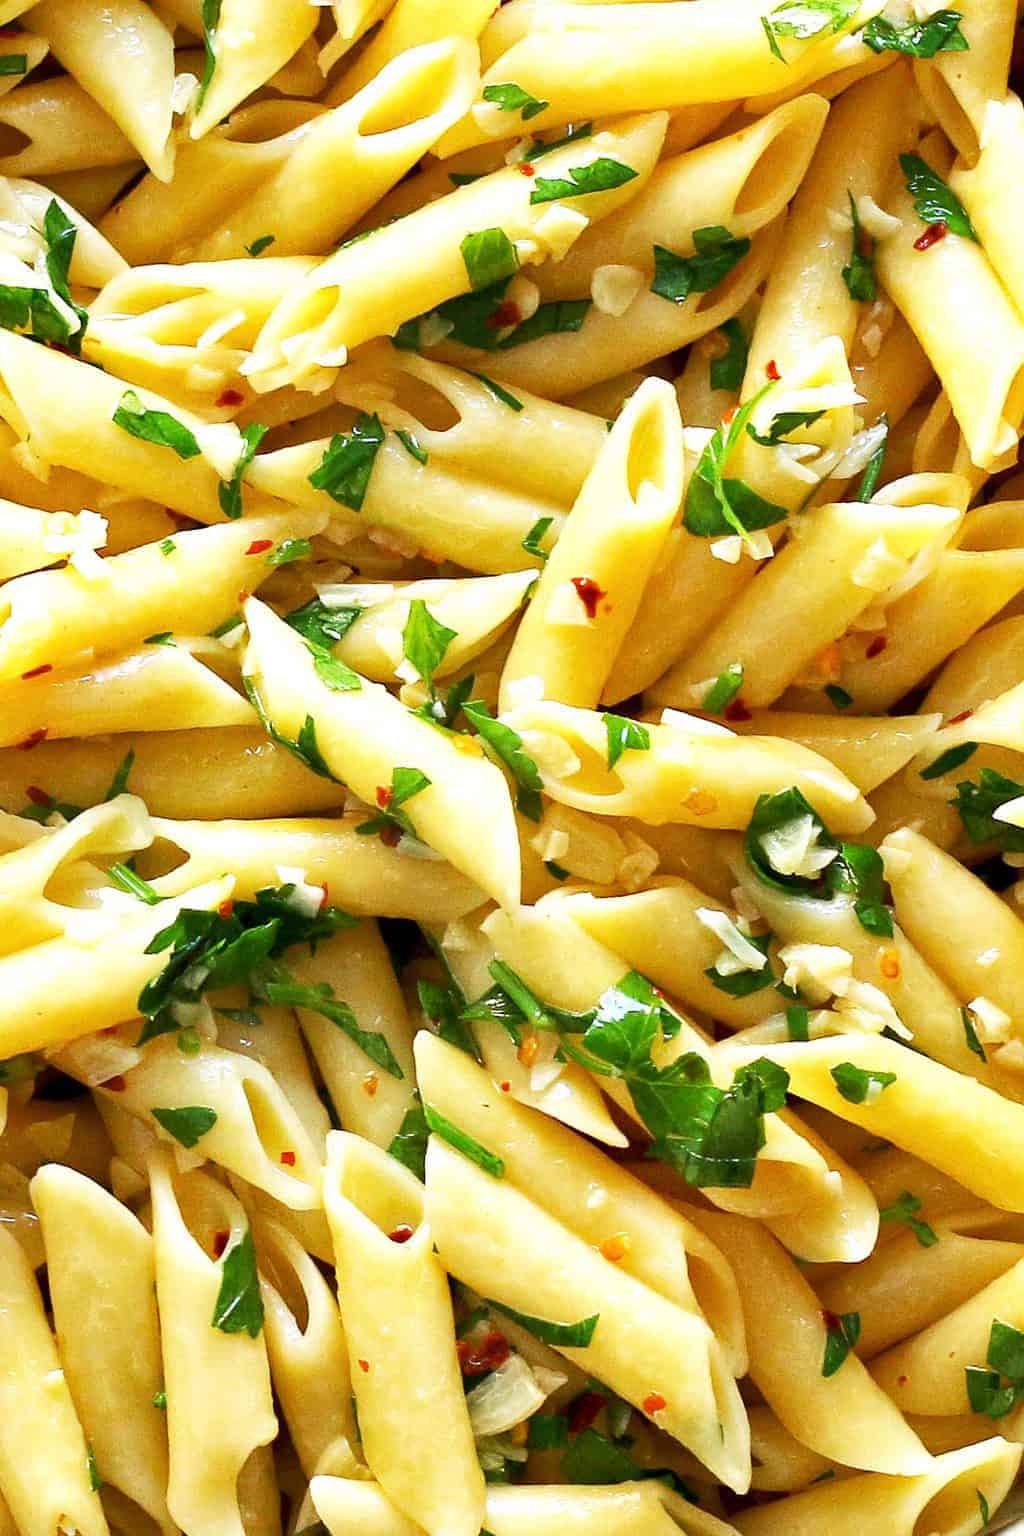 No Parmesan Xxx Video - Penne Aglio e Olio - Easy Pasta Dish (with VIDEO!) Â» The Thirsty Feast